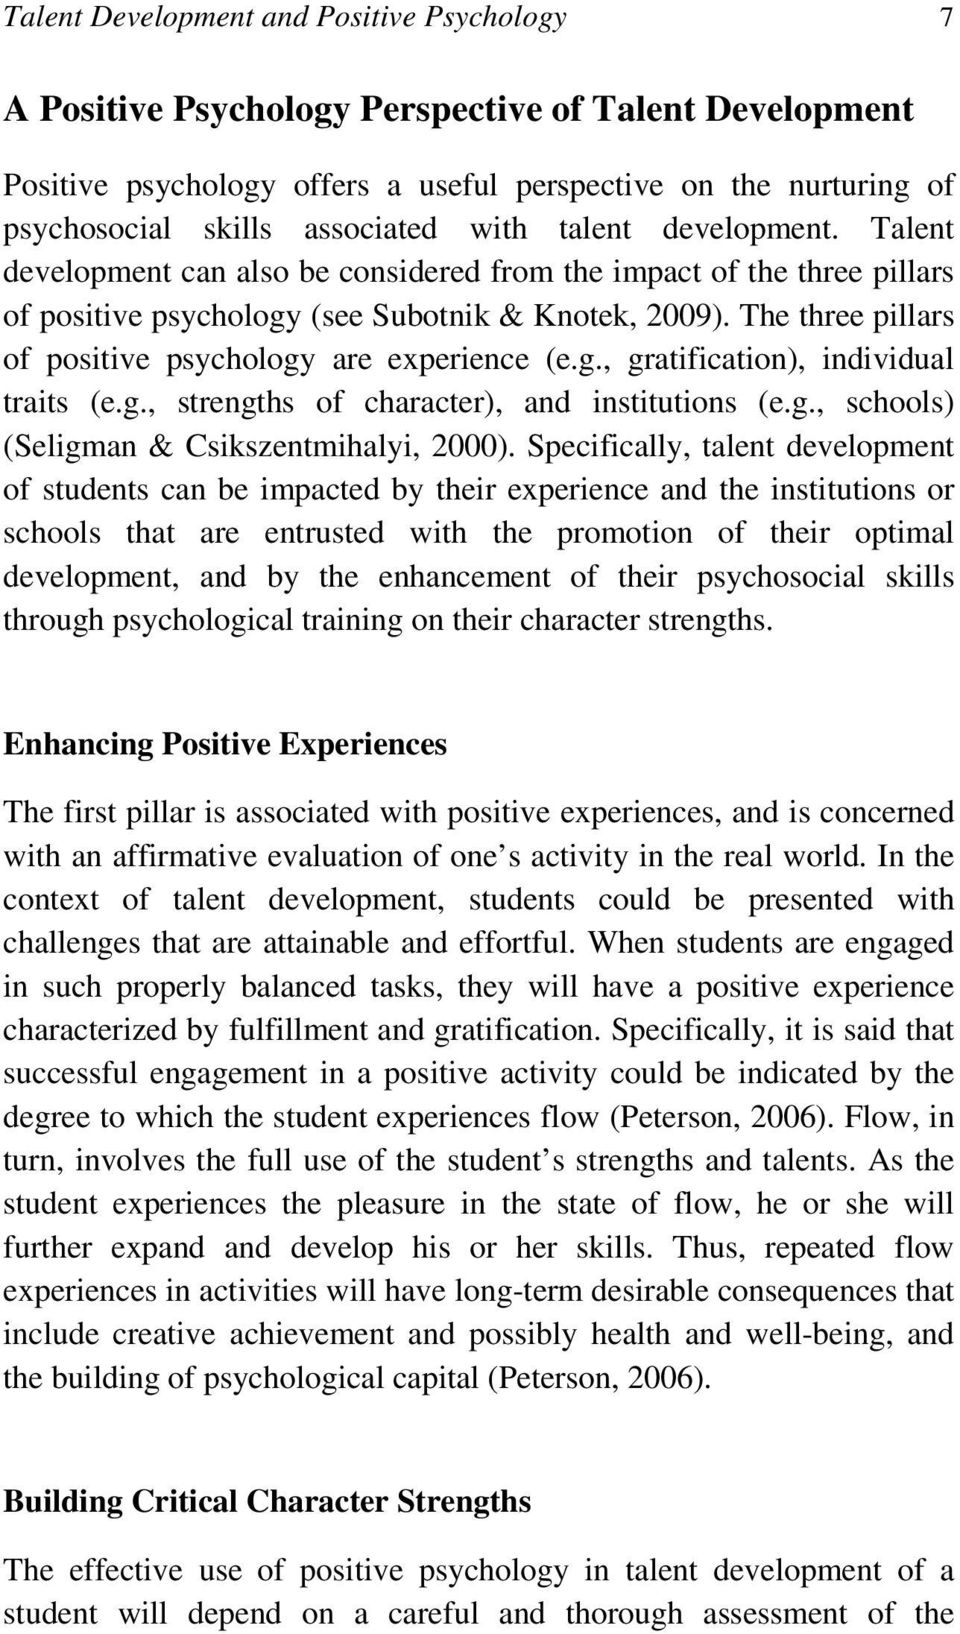 The three pillars of positive psychology are experience (e.g., gratification), individual traits (e.g., strengths of character), and institutions (e.g., schools) (Seligman & Csikszentmihalyi, 2000).